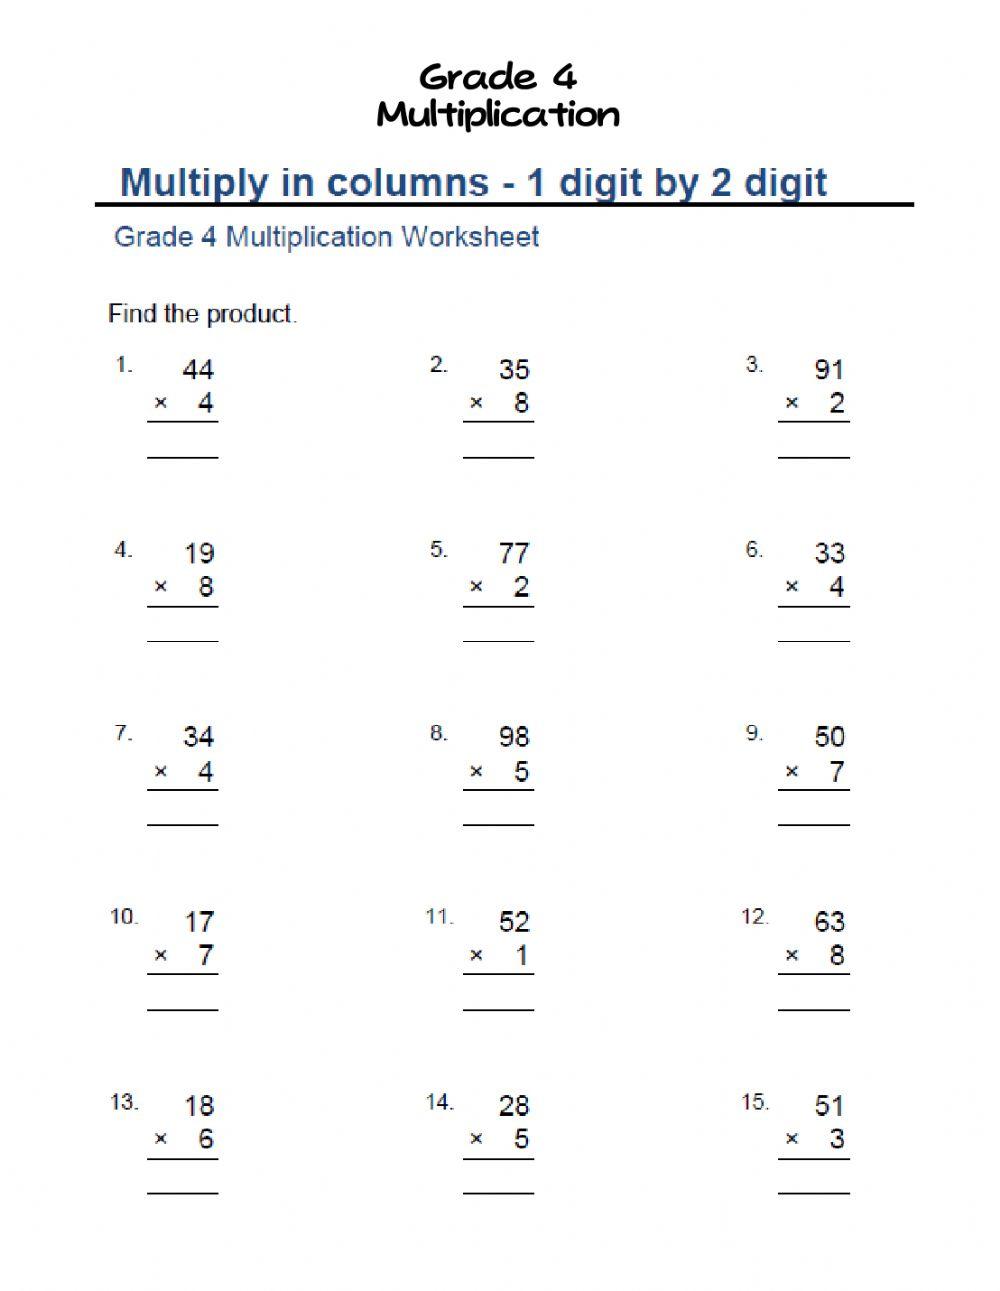 Multiply 2 digits by 1 digit p2